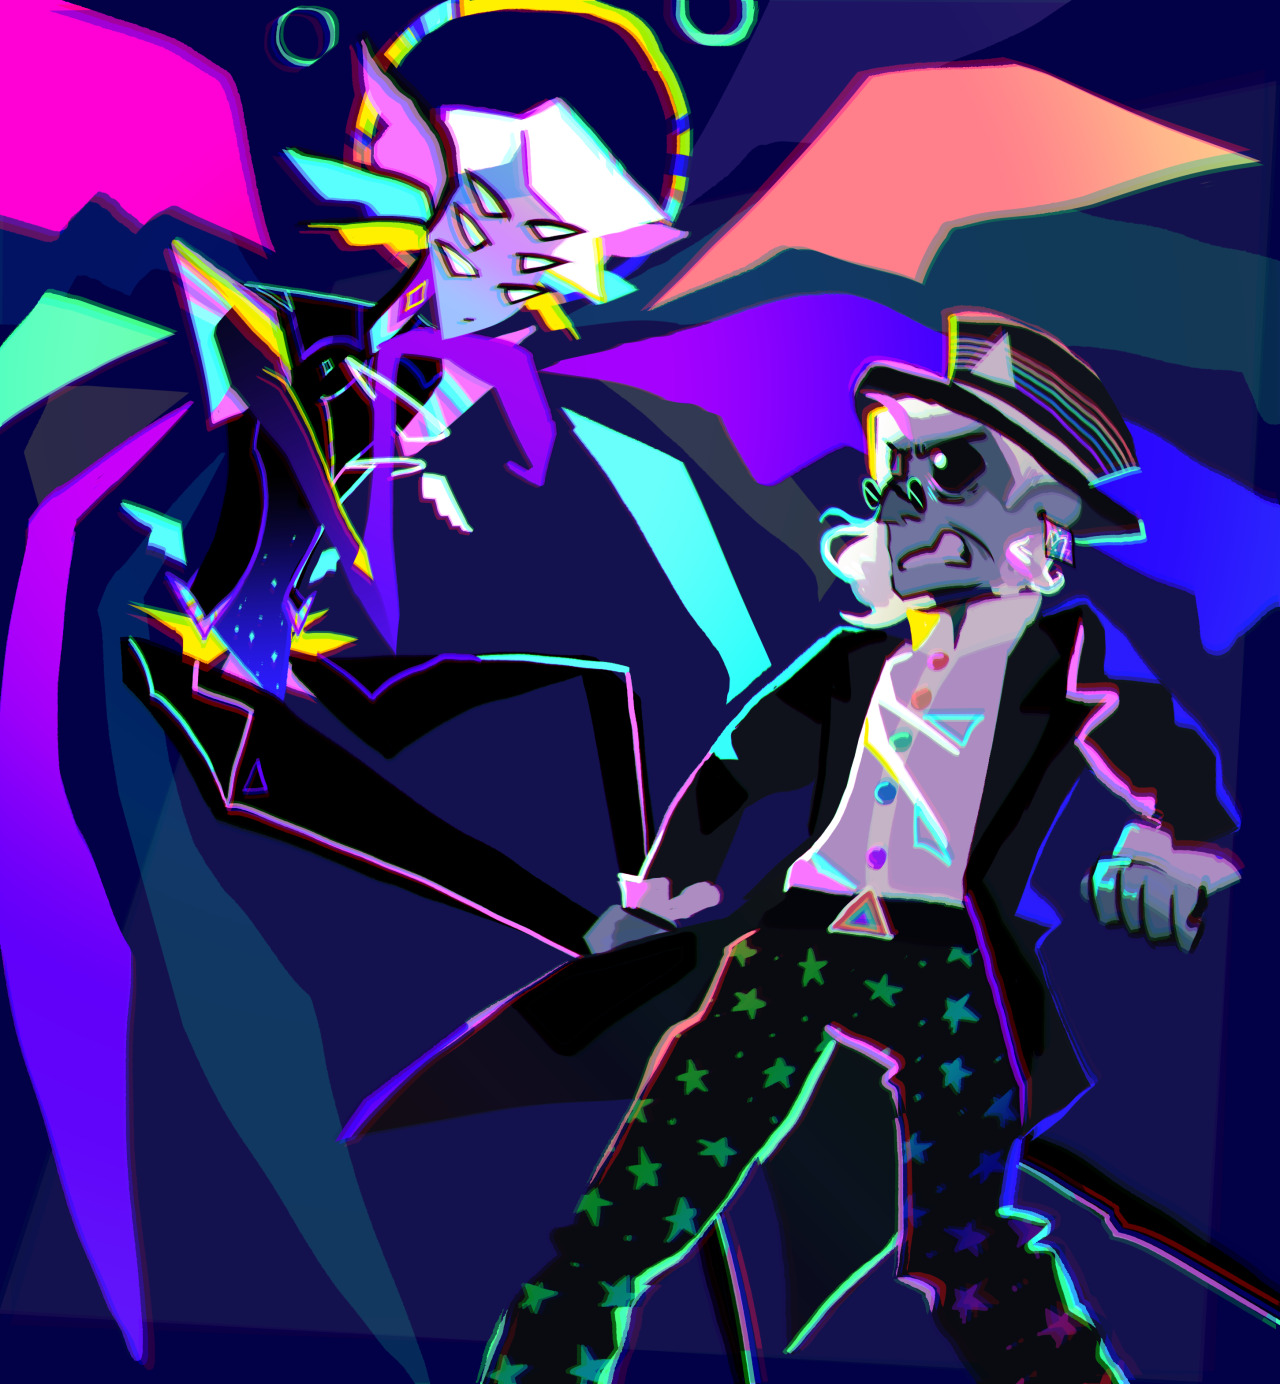 art fight, part pink purple blue🦷 fight fight fiGHT FIGHT 🦷  @stupidsunny-d
weasel.fish
@lesbardian #artfight#artfight 2021#team cyberpunk#artsy whispers #annnnnnd one oc of mine made it into this batch so lemme just #prism phosphenes